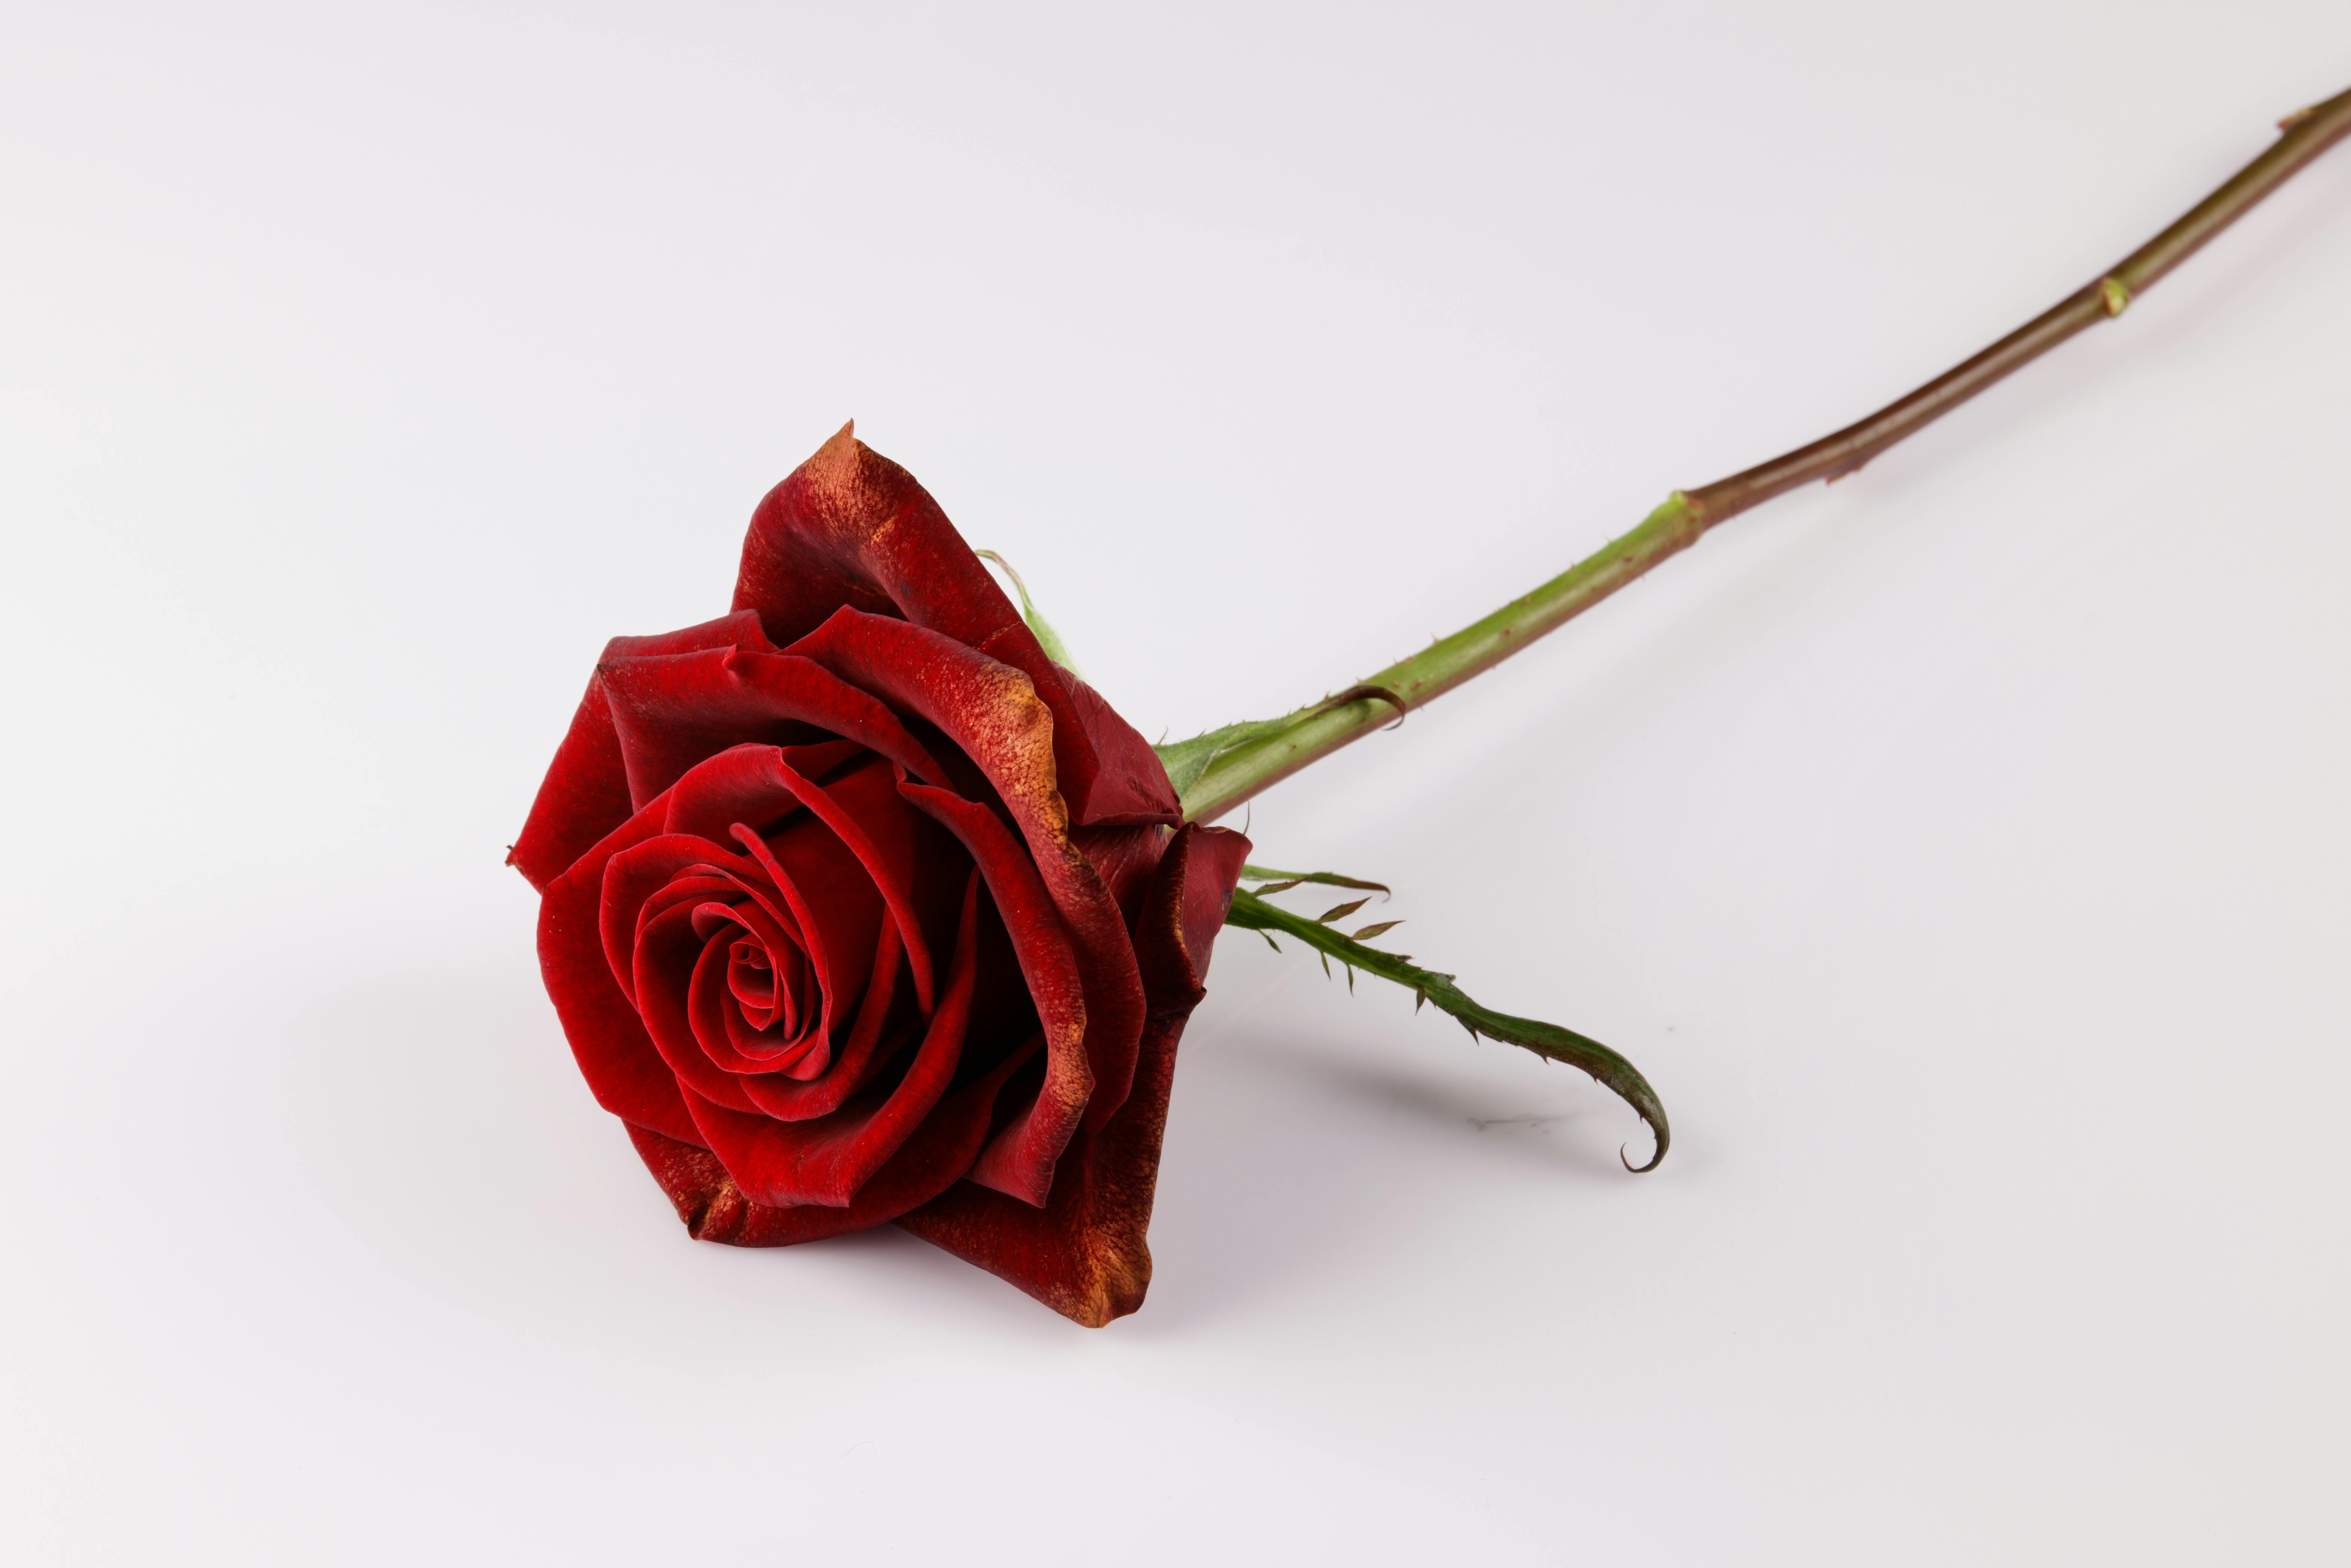 Photograph of a Red Rose with a Black Background · Free Stock Photo